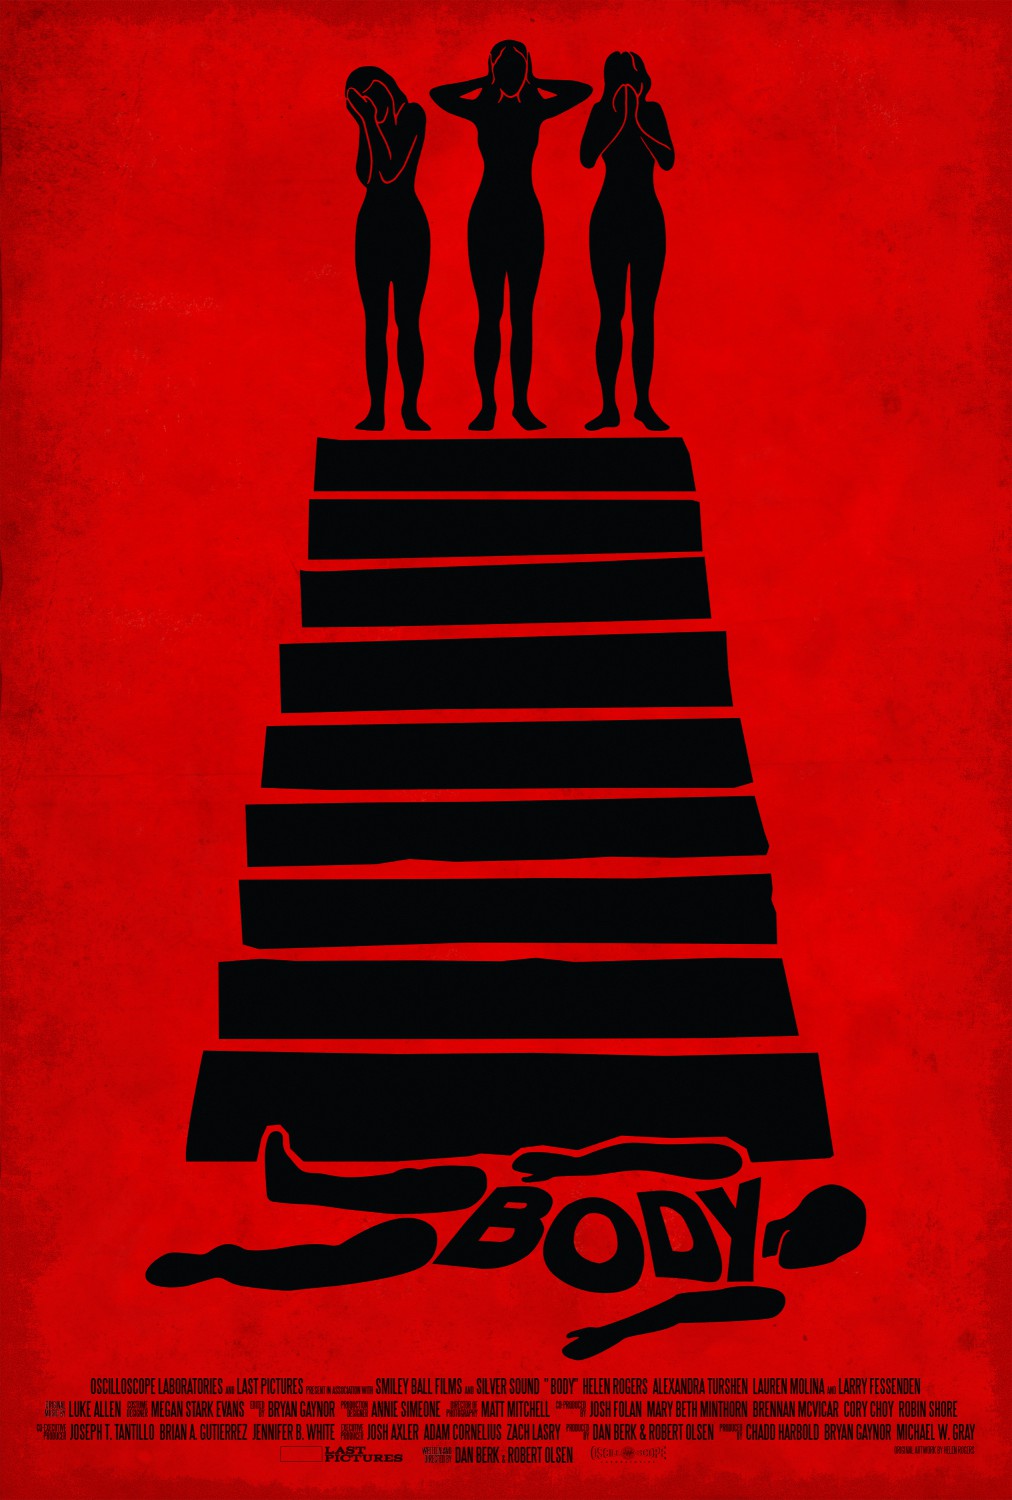 Extra Large Movie Poster Image for Body 